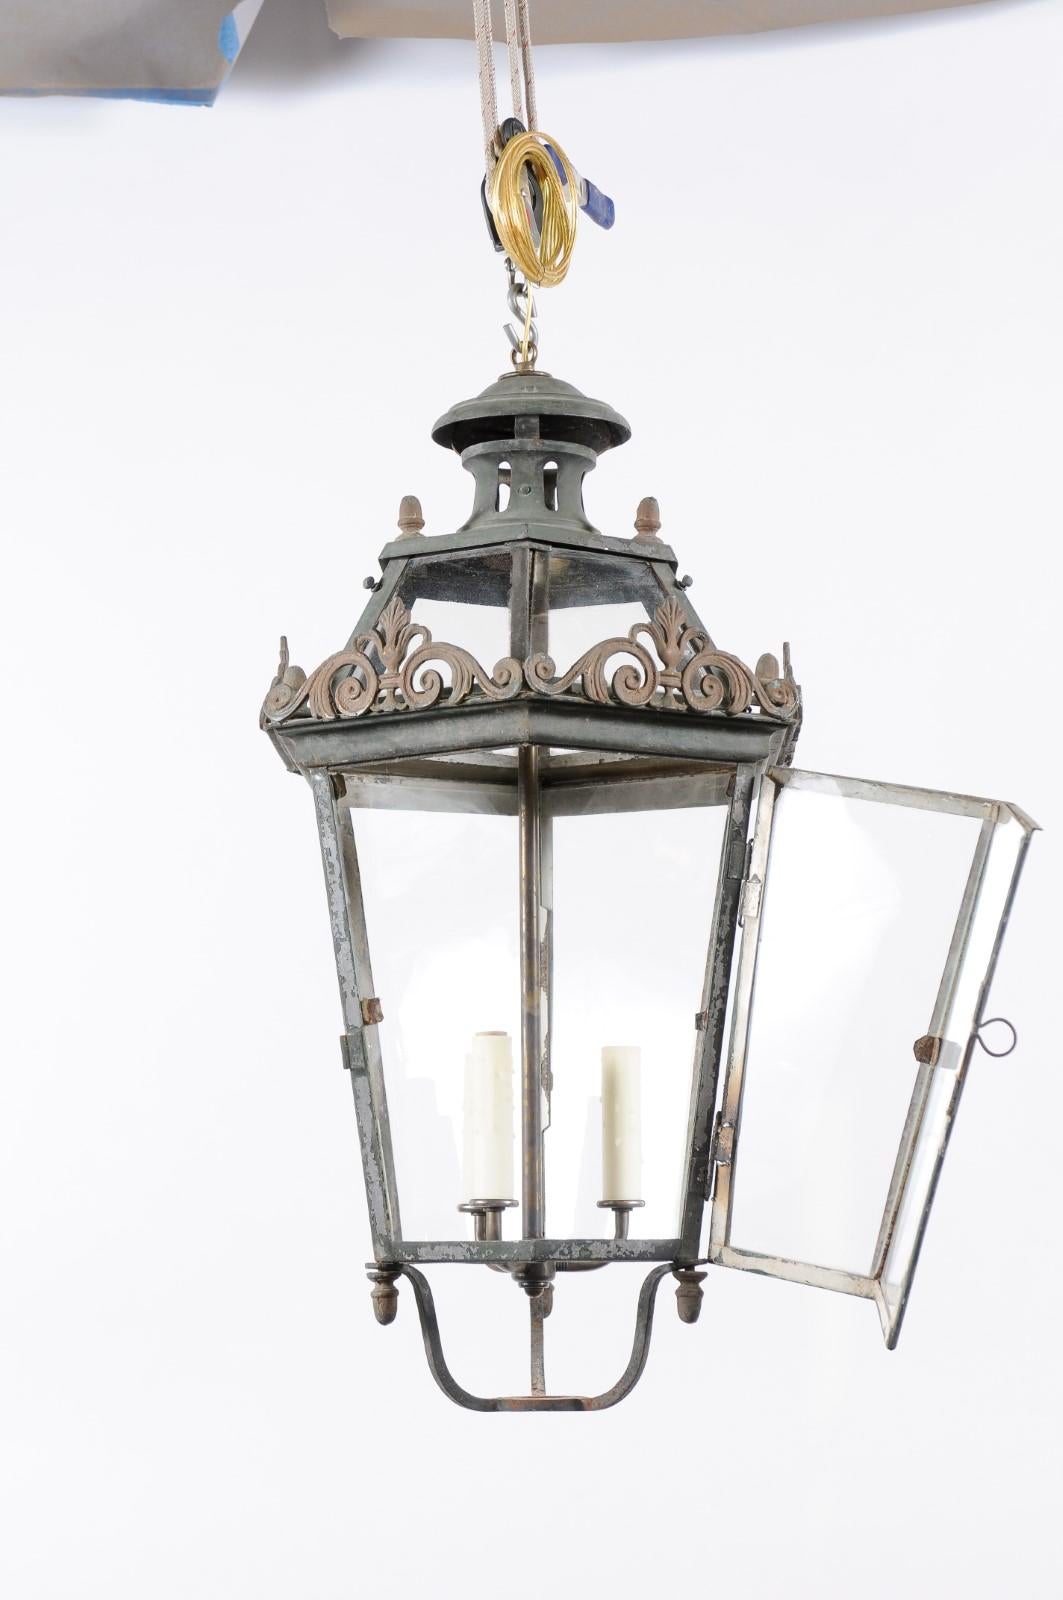  Venetian Painted Iron Street Lantern with 3 Lights, Late 19th Century For Sale 6